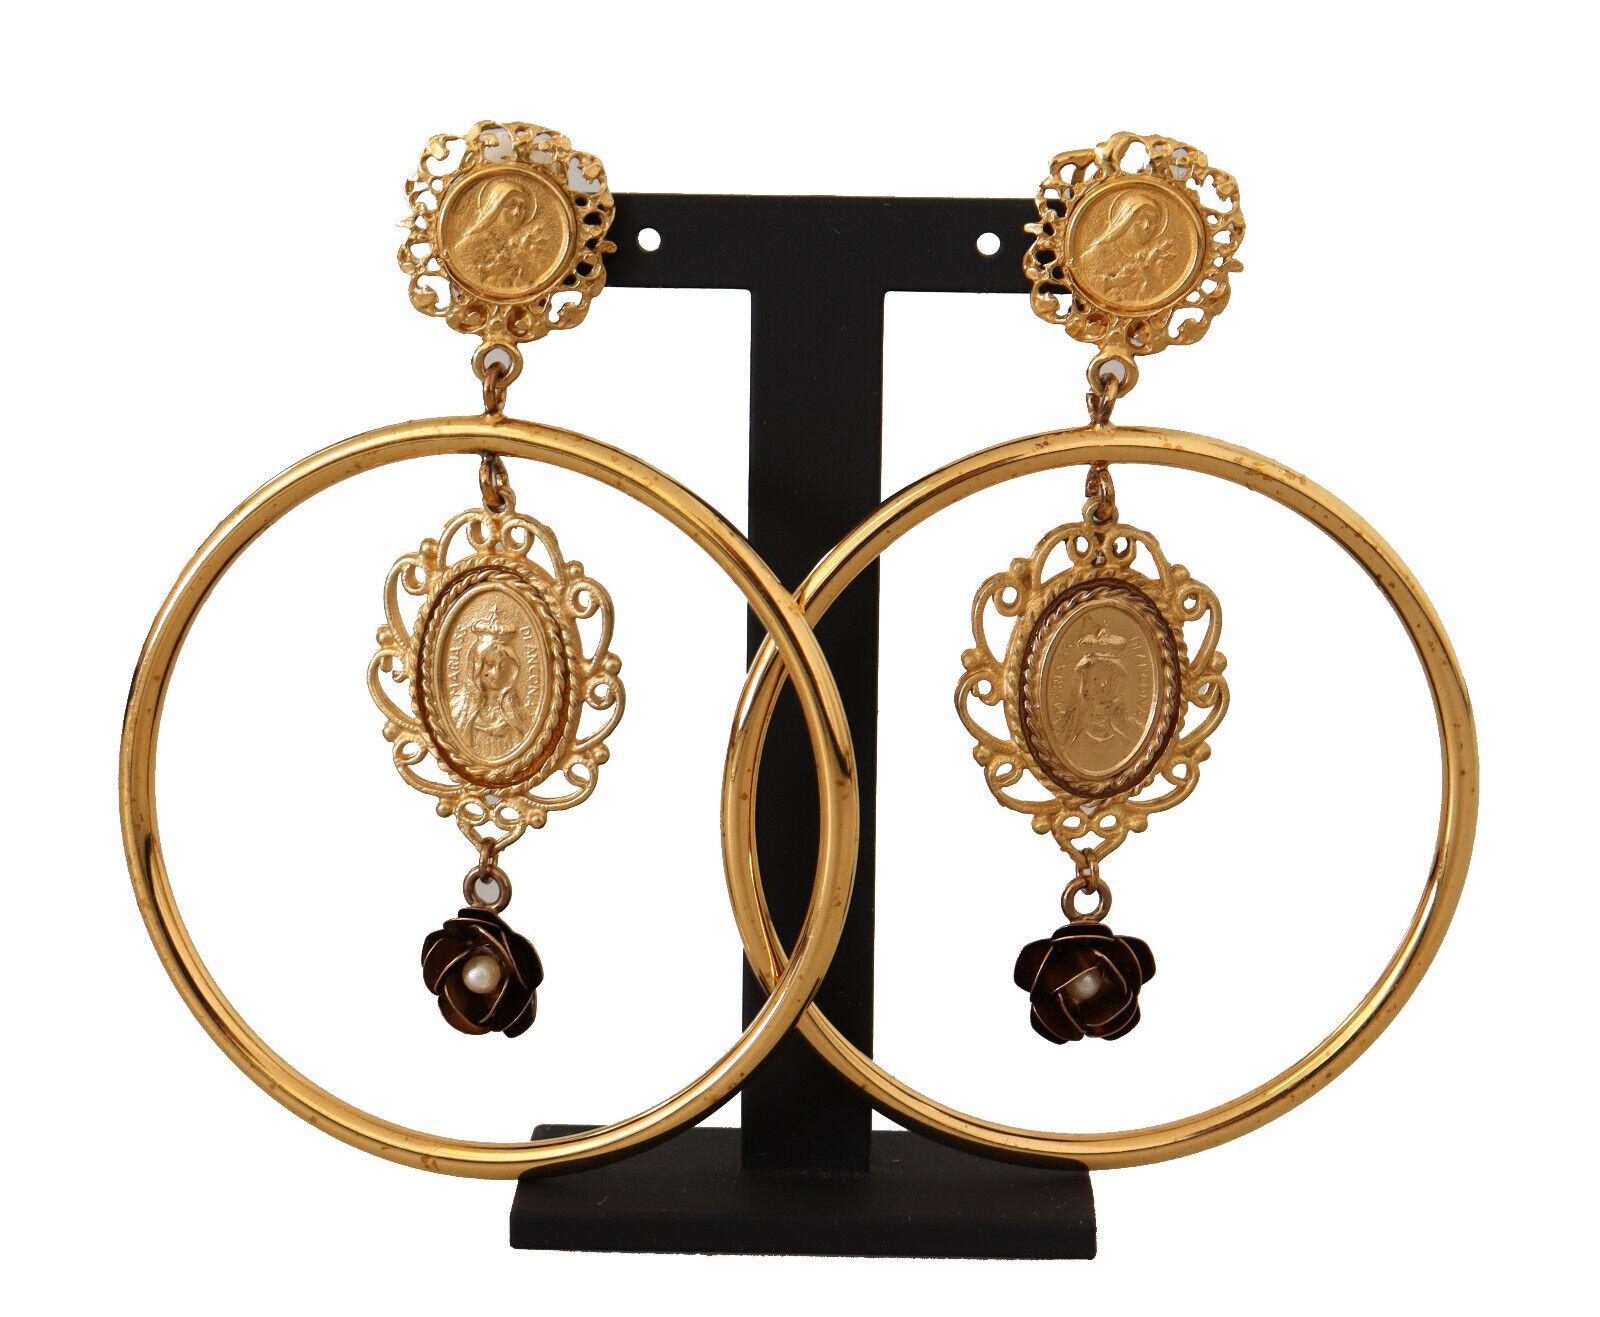 DOLCE & GABBANA

Gorgeous brand new with tags, 100% Authentic Dolce & Gabbana Earrings.
Model: Clip-on dangling hoop
Motive: Sicily
Material: Brass

Color: Gold

Logo details
Made in Italy

Length: 7cm

Dolce & Gabbana Box, Original tags